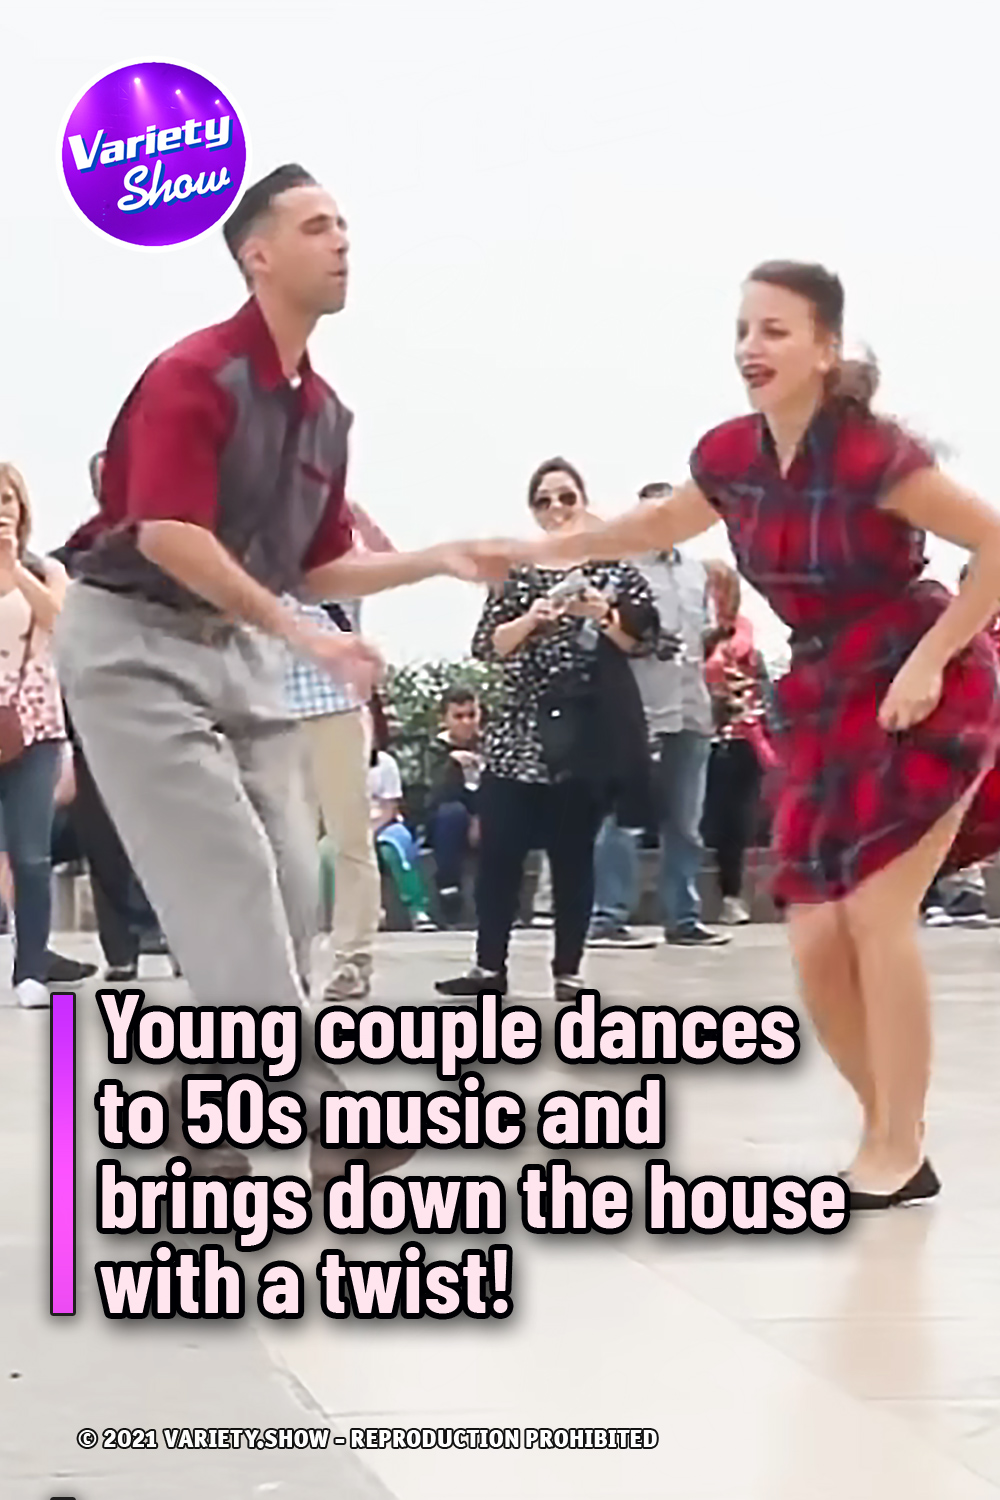 Young couple dances to 50s music and brings down the house with a twist!